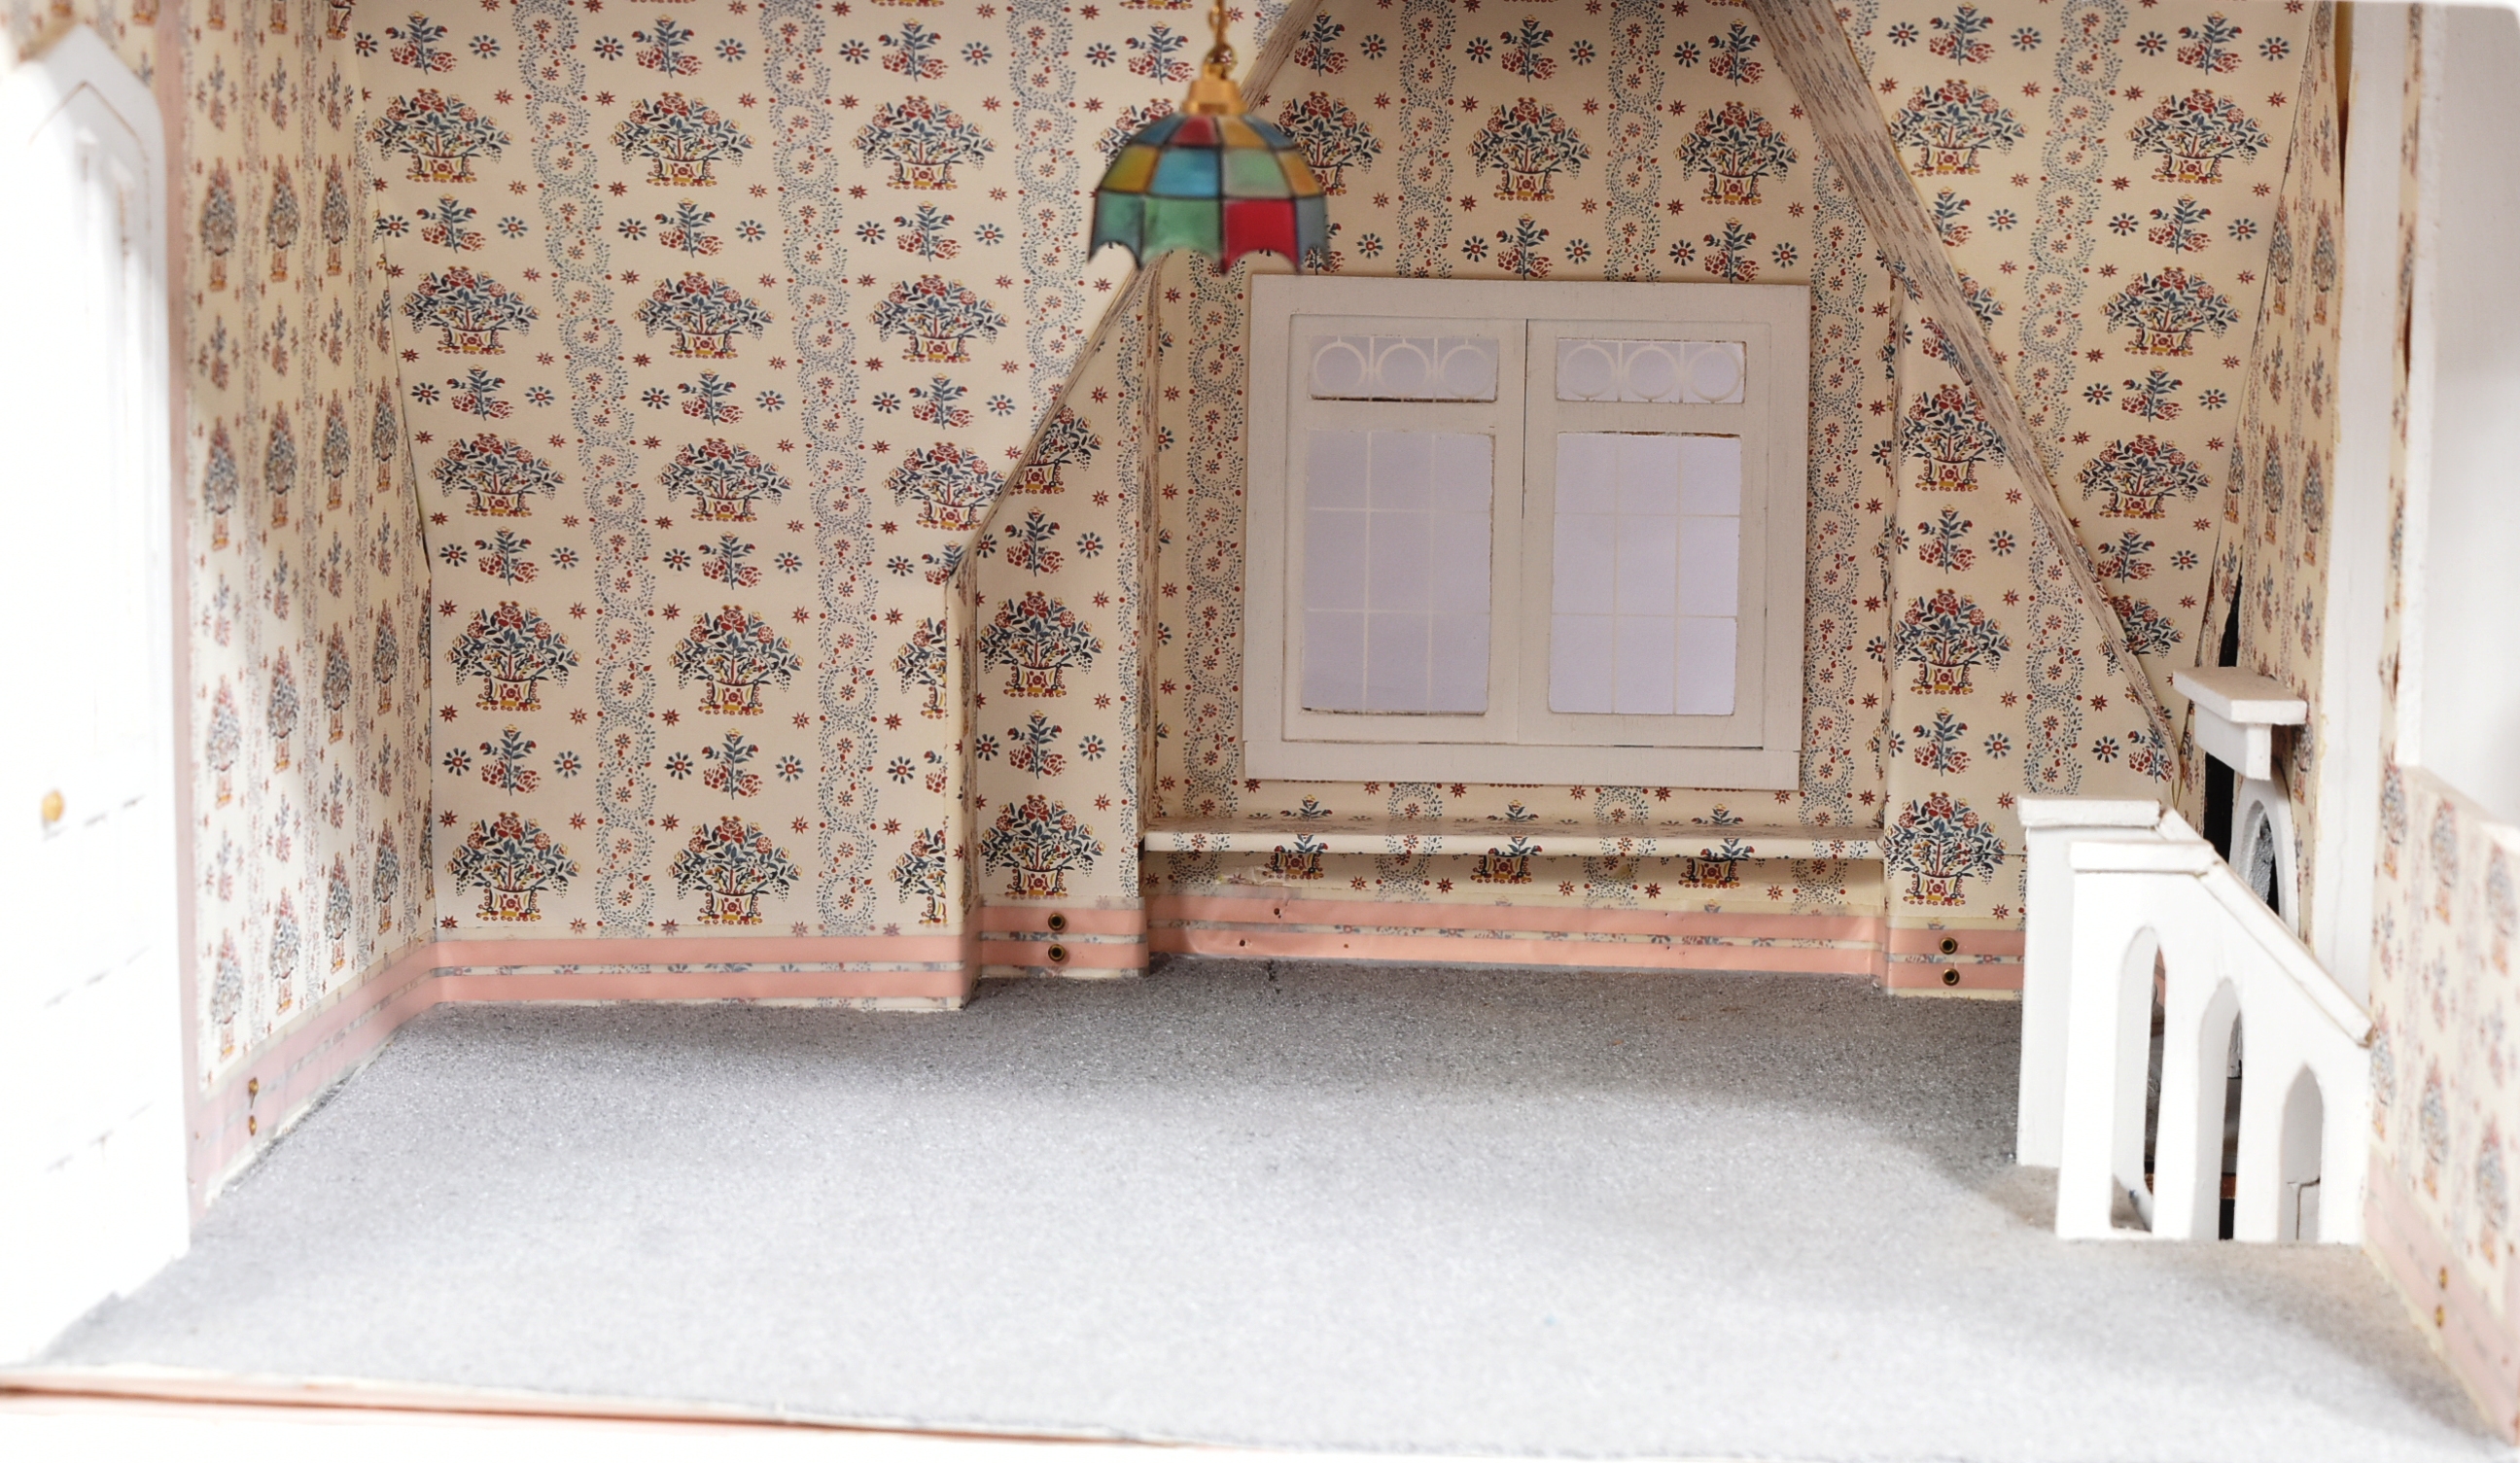 DOLL'S HOUSE - MOCK-TUDOR STYLE COUNTRY MANOR HOUSE - Image 3 of 7